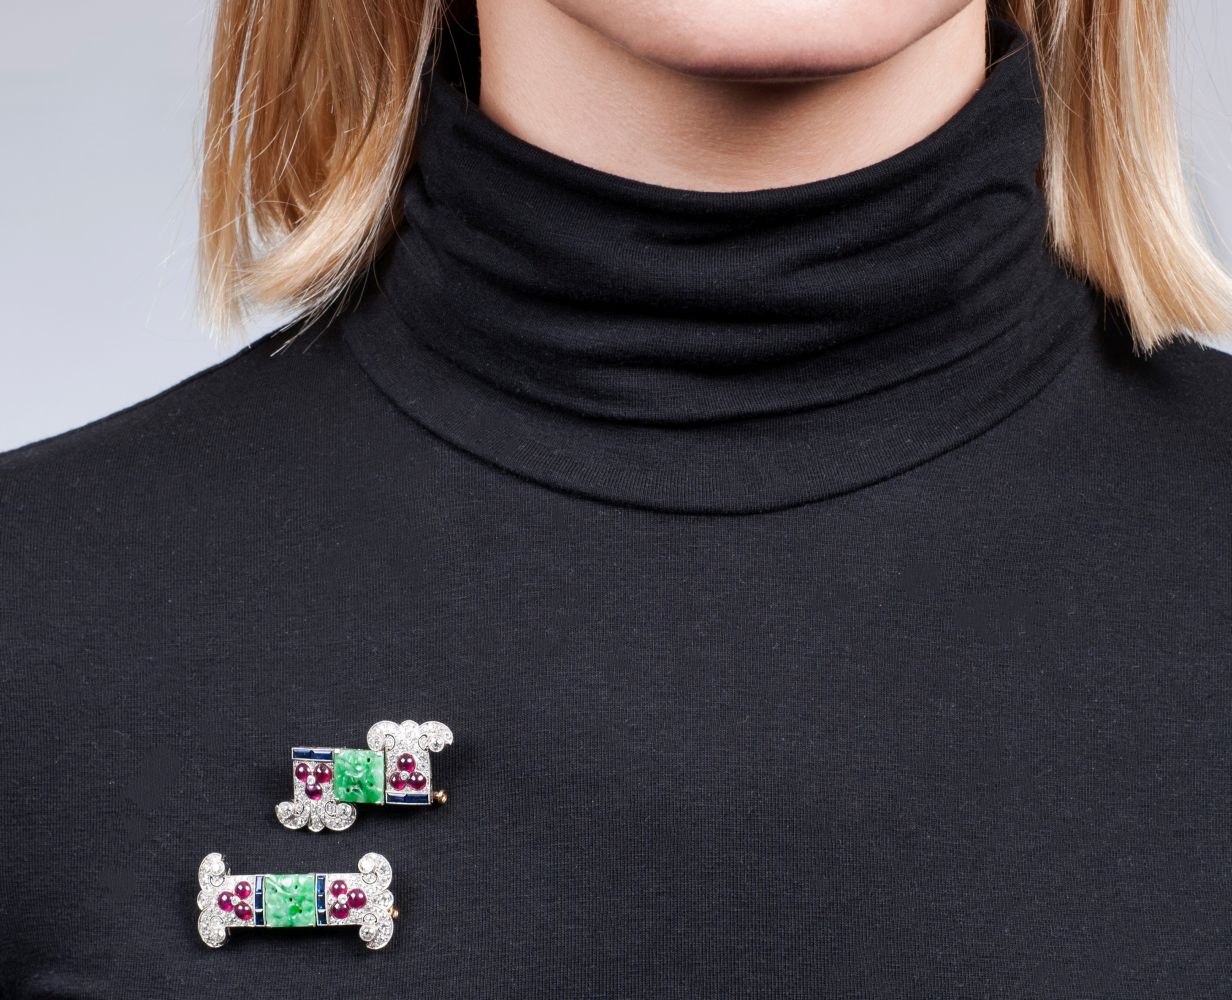 A Pair of Art-déco Diamond Clipbrooches with Rubies, Sapphires and Jade - image 2